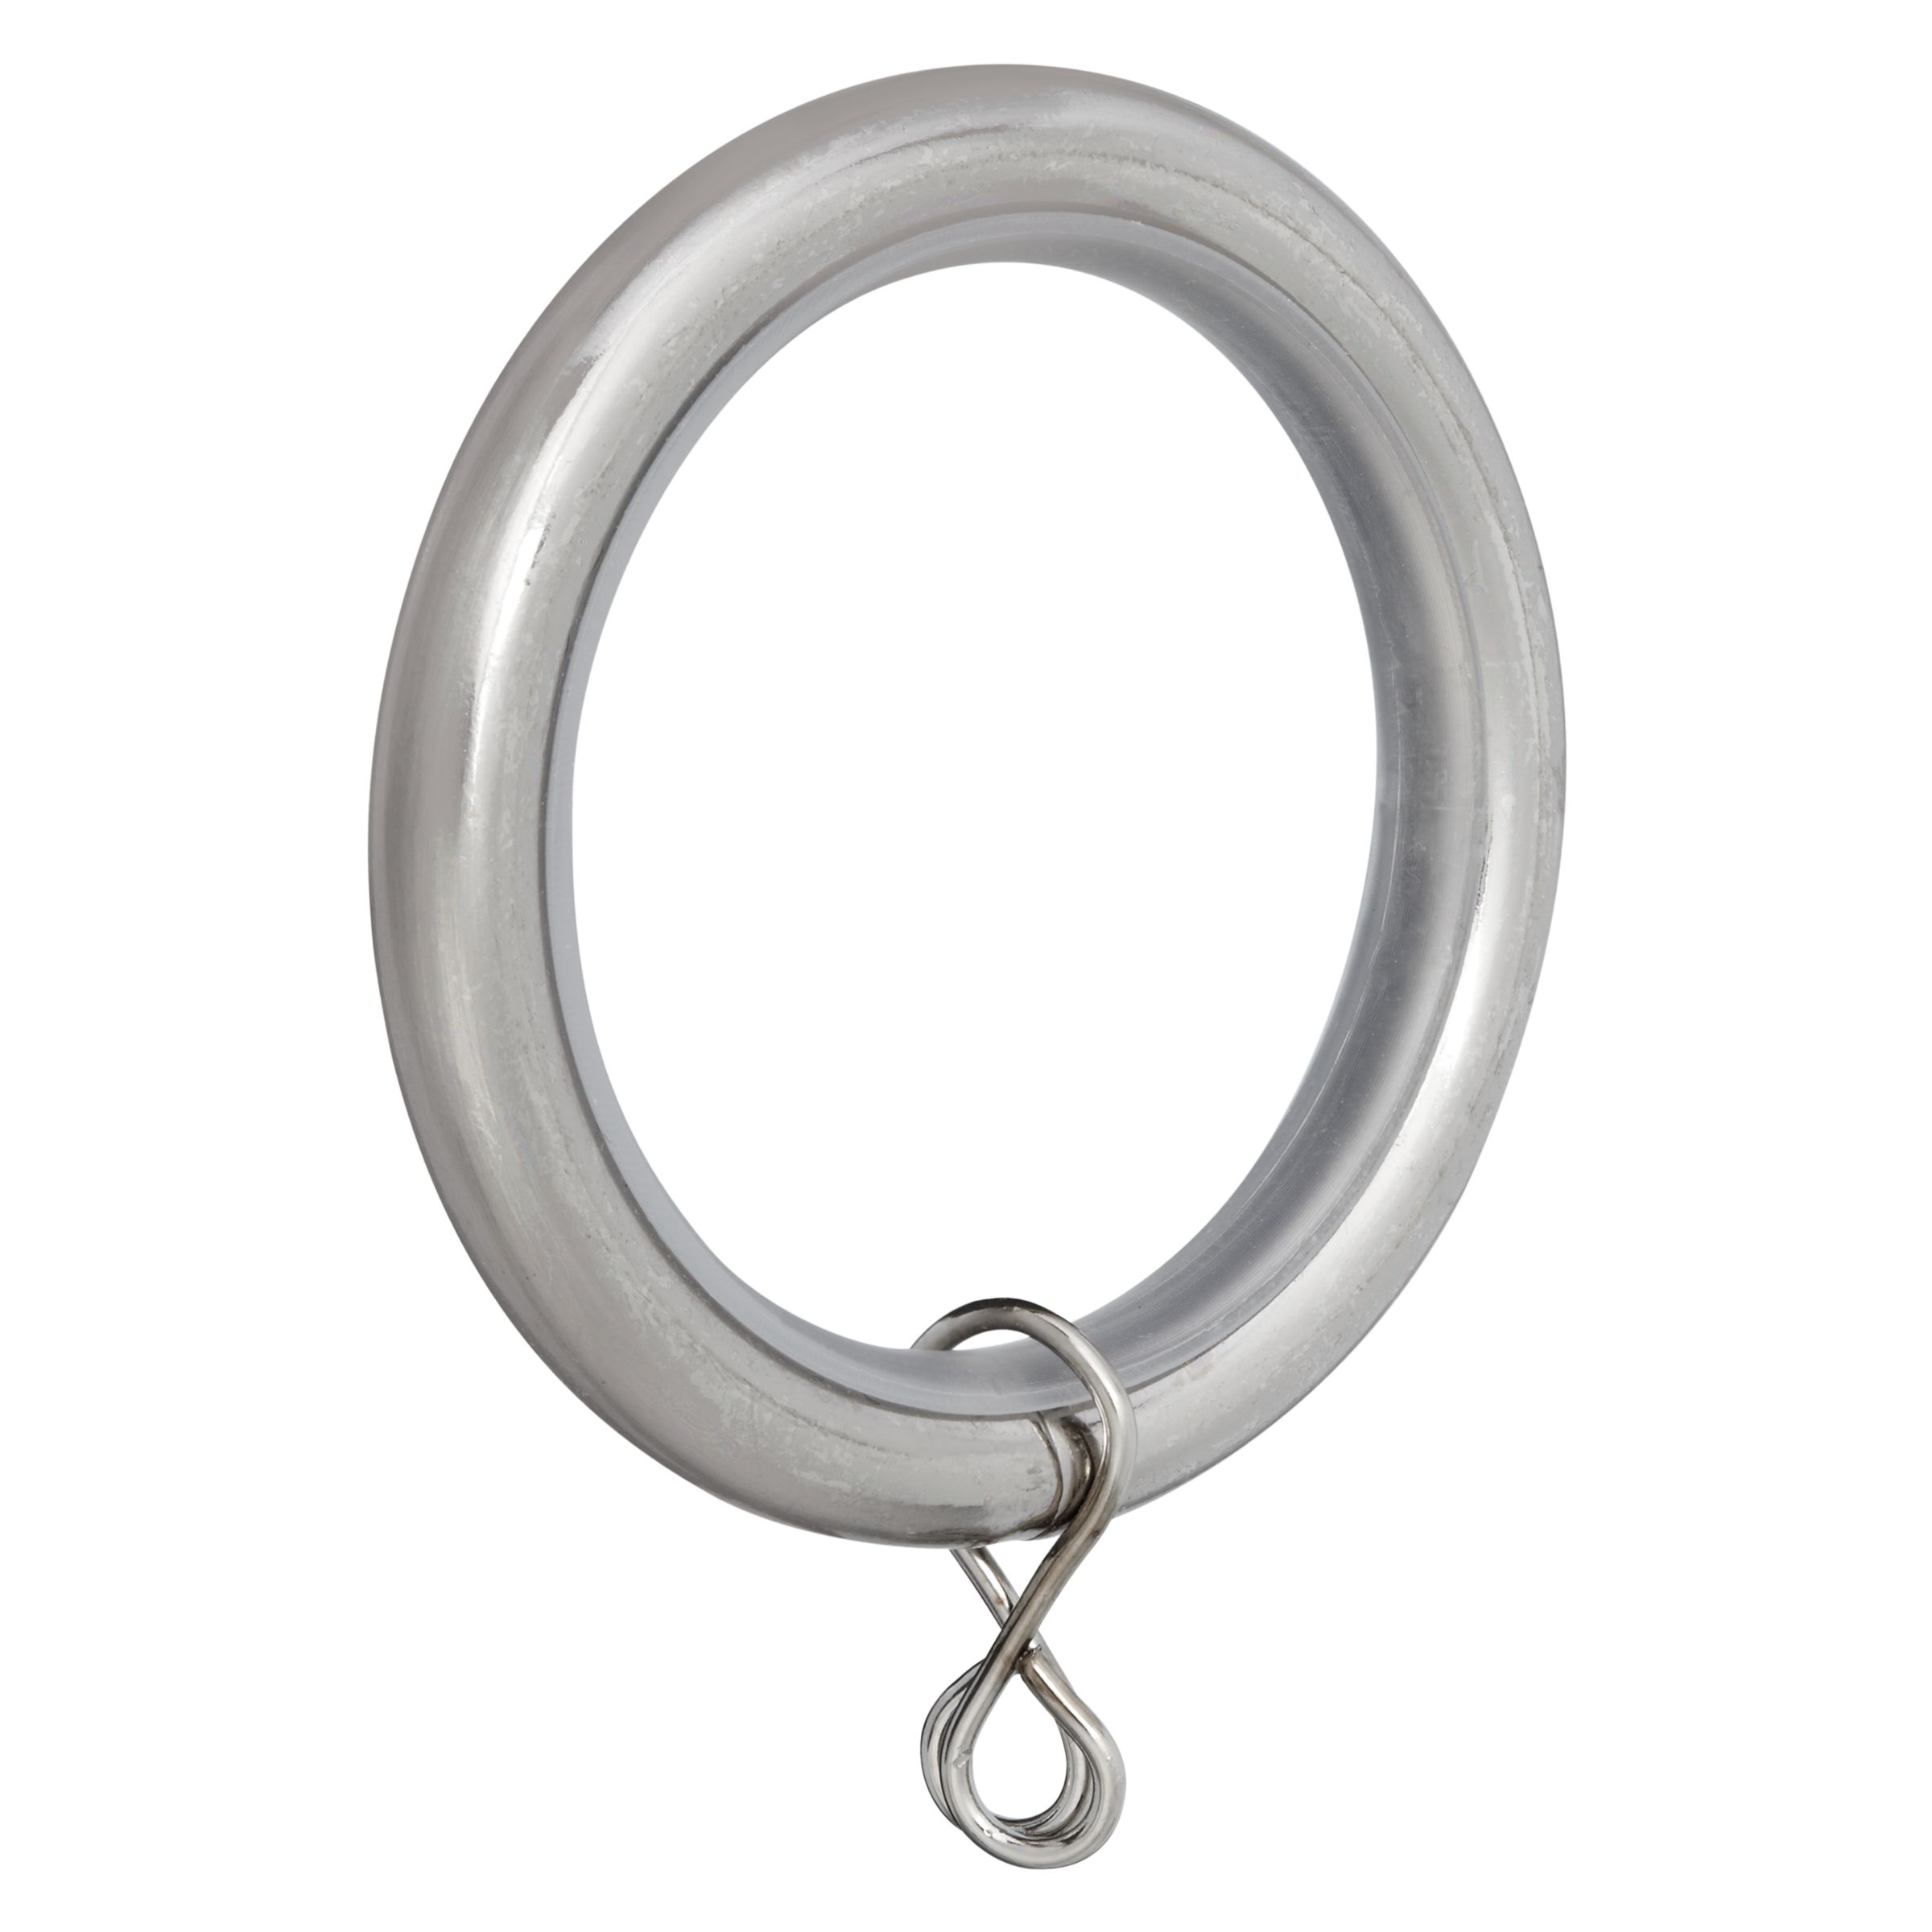 John Lewis & Partners Extendable Curtain Rings, Steel, Pack of 6, Dia.25/28mm